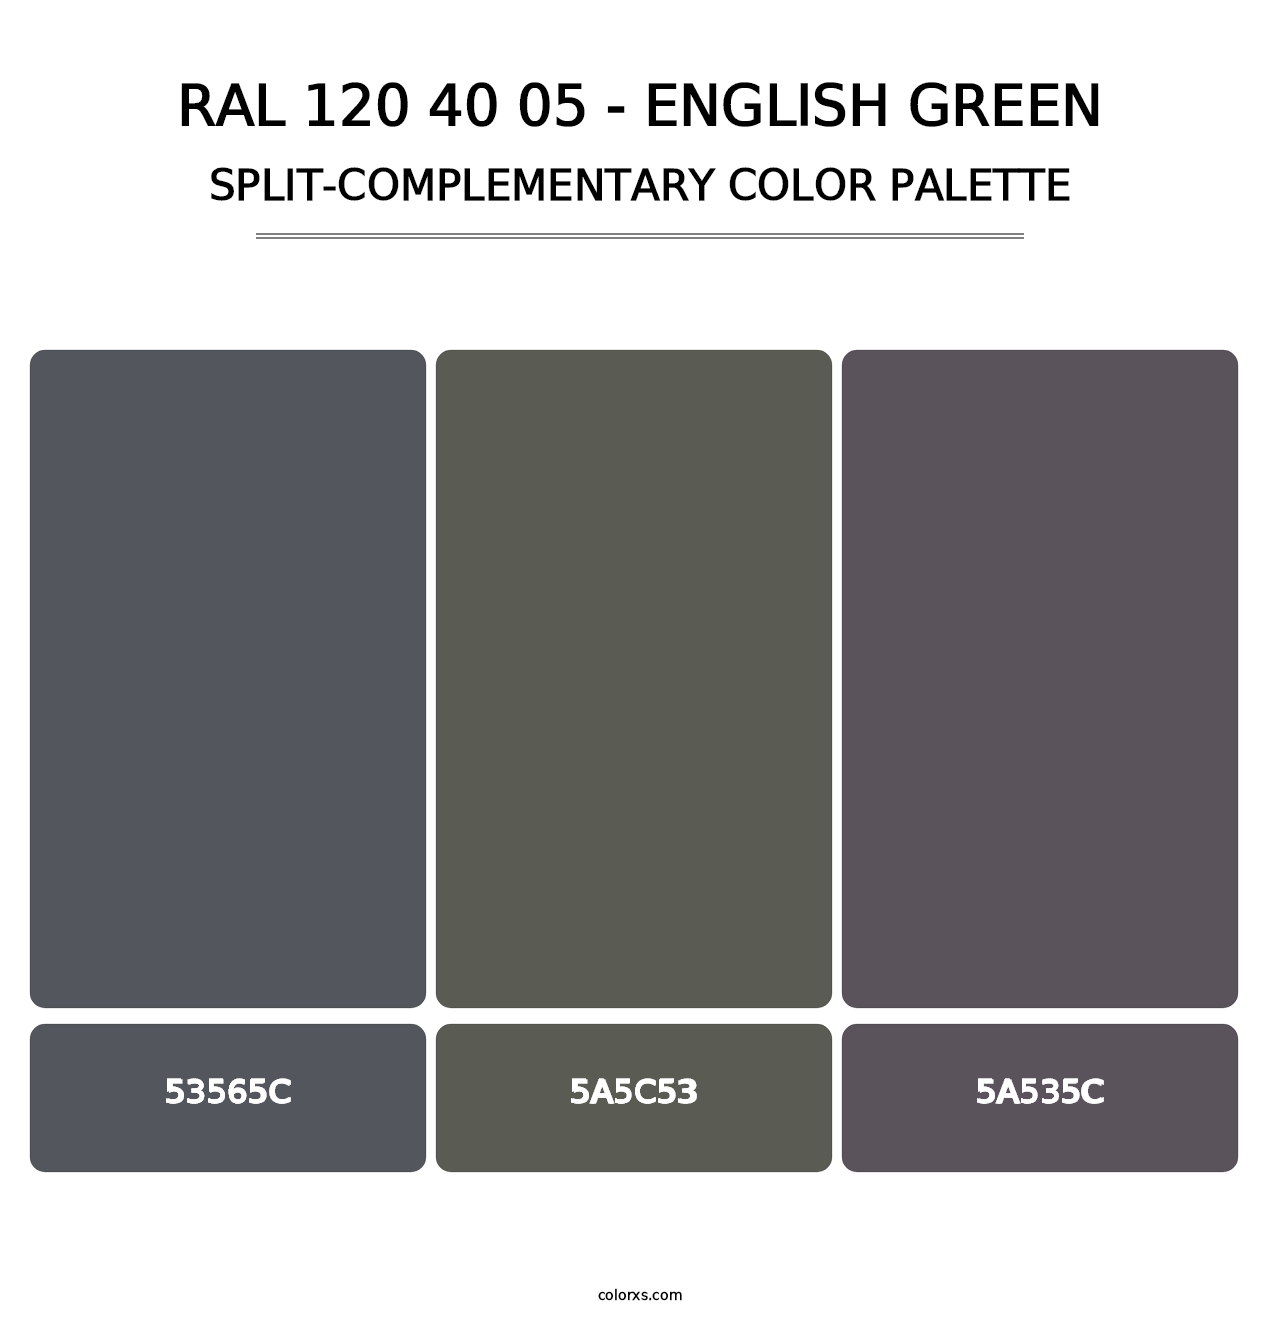 RAL 120 40 05 - English Green - Split-Complementary Color Palette